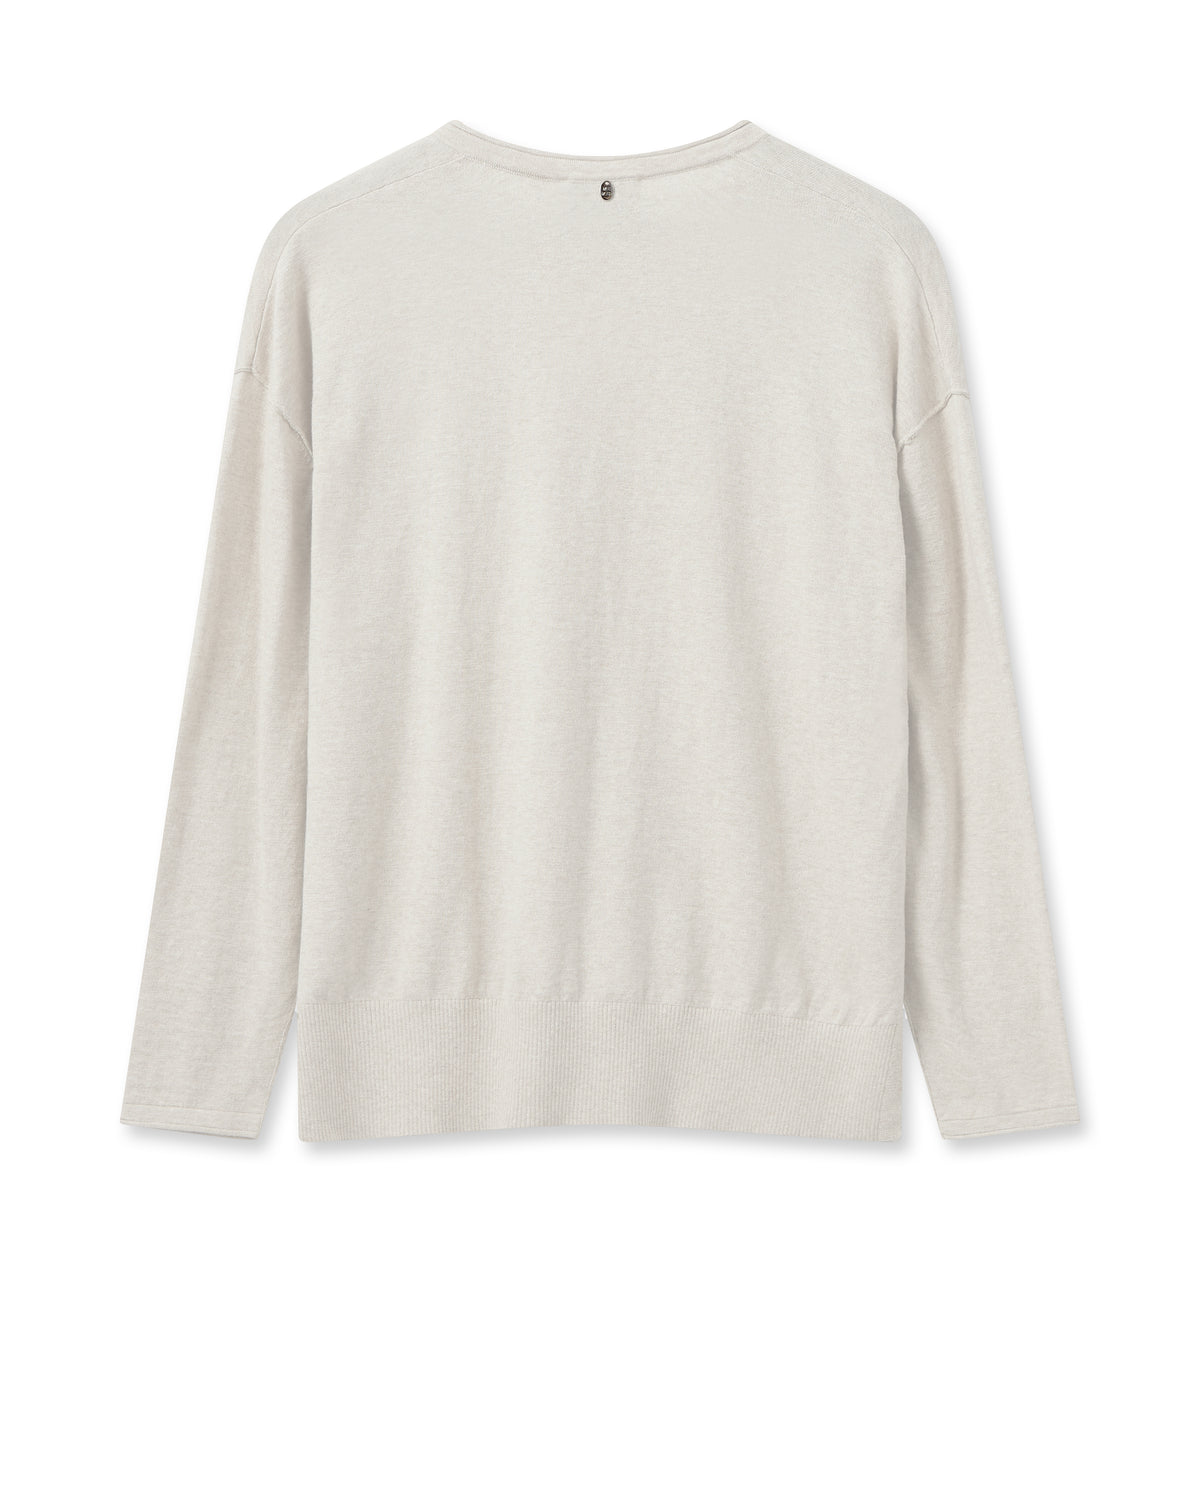 Off-white V neck lightweight jumper with long sleeves dipped hem side splits and rolled edges